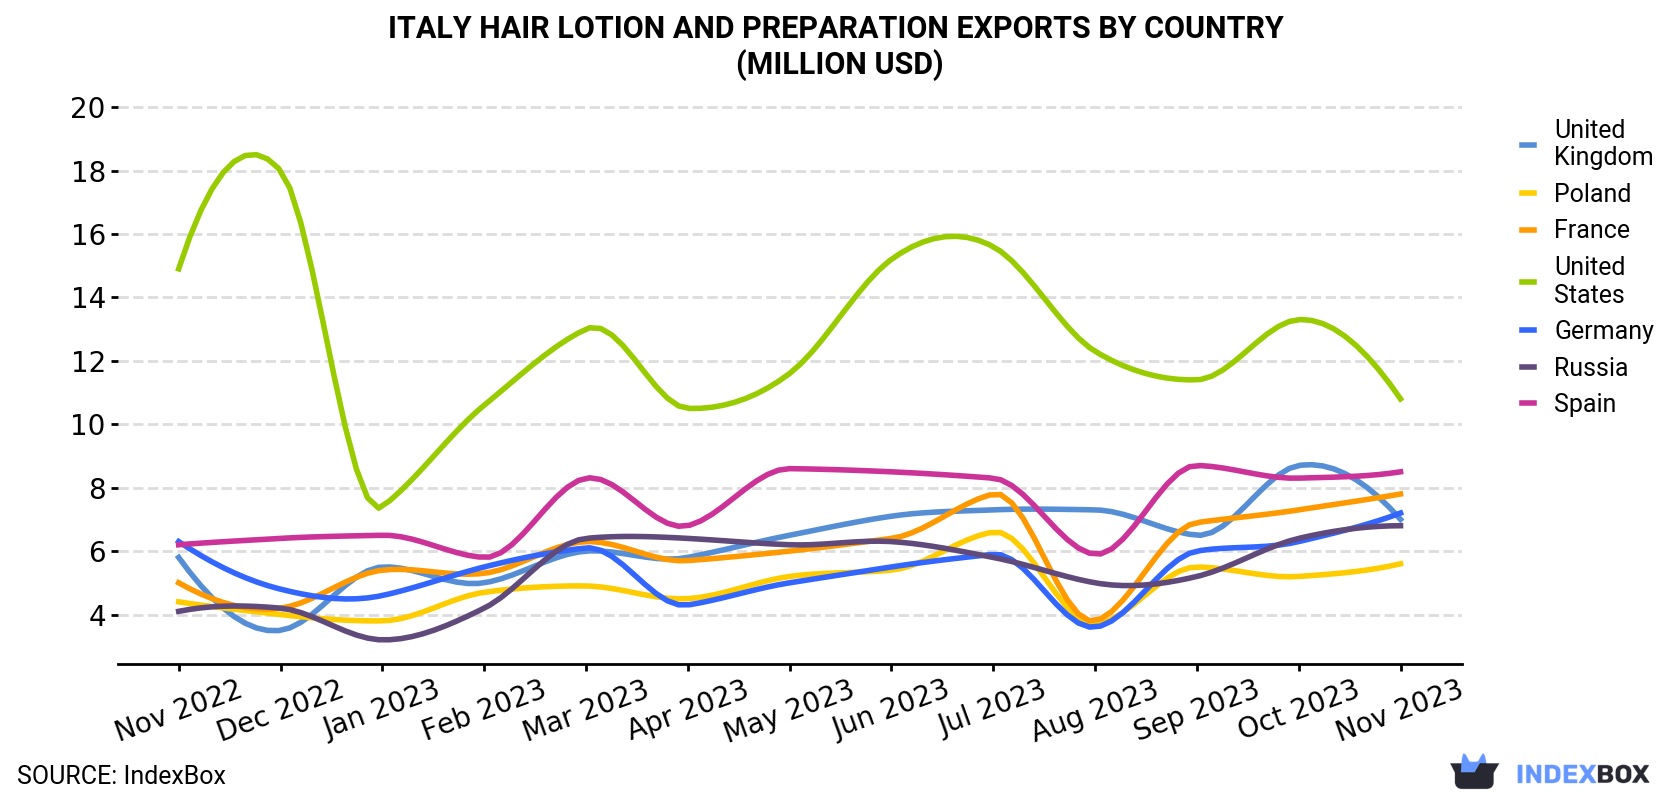 Italy Hair Lotion and Preparation Exports By Country (Million USD)